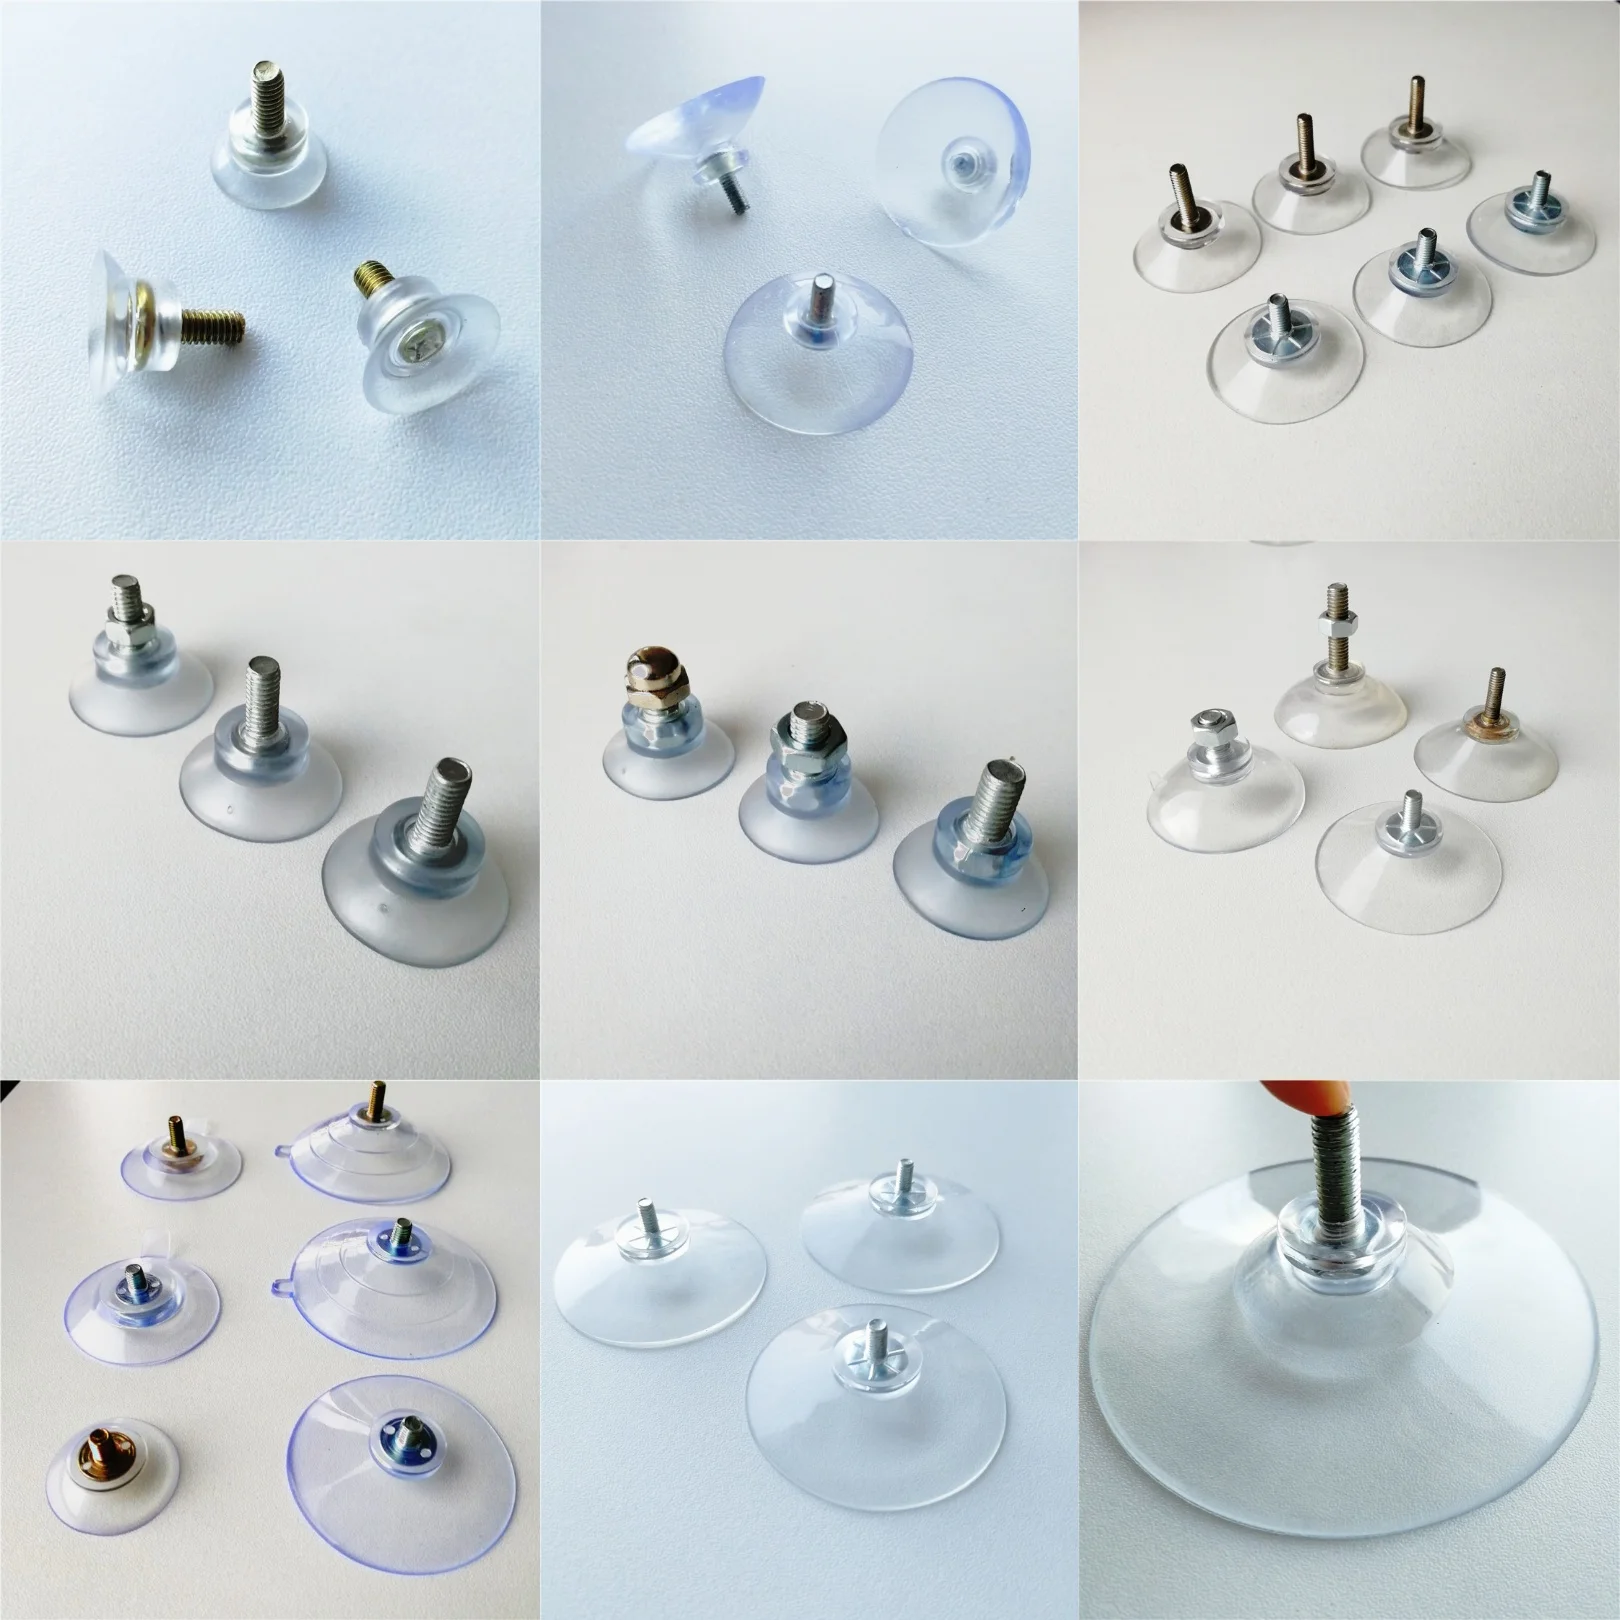 incl Diameter 40 mm knurled Nuts Transparent Made in Germany with Thread M4 x 10 mm DIYexpert® 4 x Suction Cups 